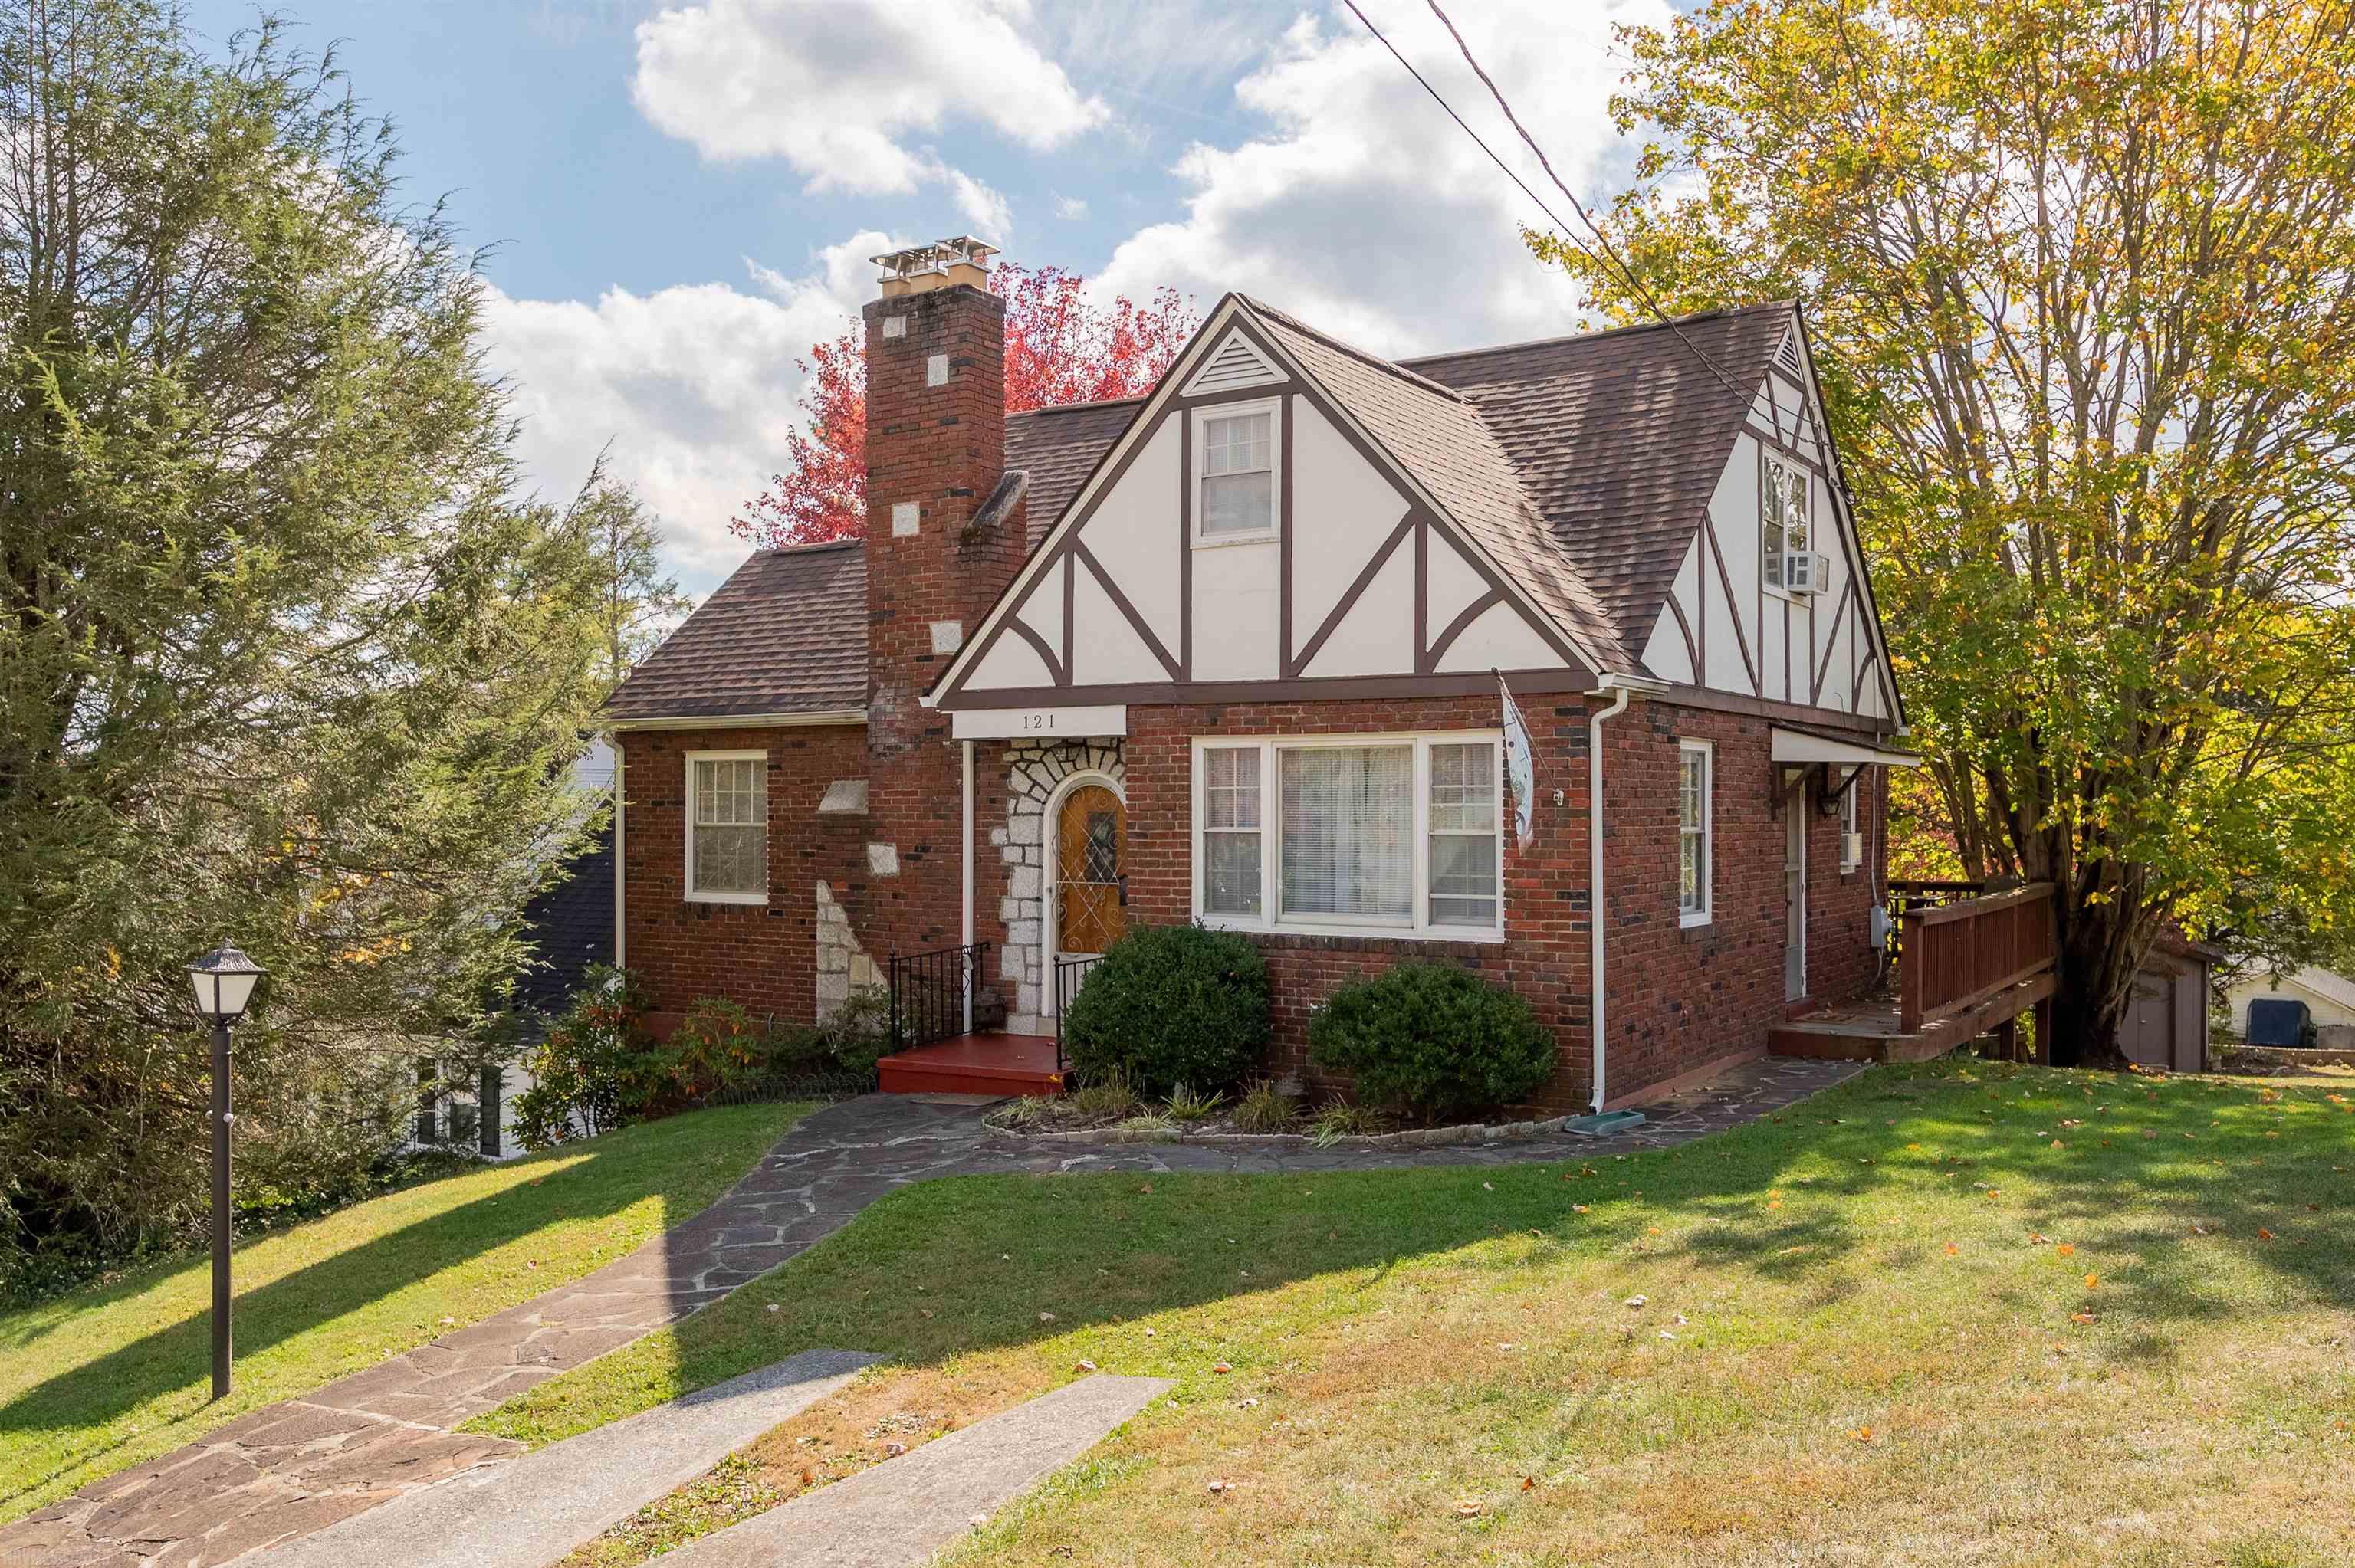 You will absolutely love this charming Tudor home in the historic area of Pulaski County! Sure to steal your heart from the start with a mix of brick & wood exterior, flag stone walkways, new roof & gutters 2018 and an array of mature trees & landscaping. Step through a gorgeous wood door with stained glass to find gleaming hardwood flrs, arched entries and beautiful built-ins all in sun-filled floor plan ready to accommodate daily needs & entertaining style! Sprawling living room with large windows, built-in bookcase and gas fireplace. French door to sunroom with exposed brick & panoramic backyard views. Classic chandelier hangs in the dining room ready to light the way for your finest dinner parties. Kitchen is just next door for easy serving options w/ample cabinetry & counter space. 3 beds & 2 full baths cover your growing needs. Walkout basement offers excellent storage or create more living space. Rear deck for BBQs overlooks lush backyard with peeping mountain views. Call today!